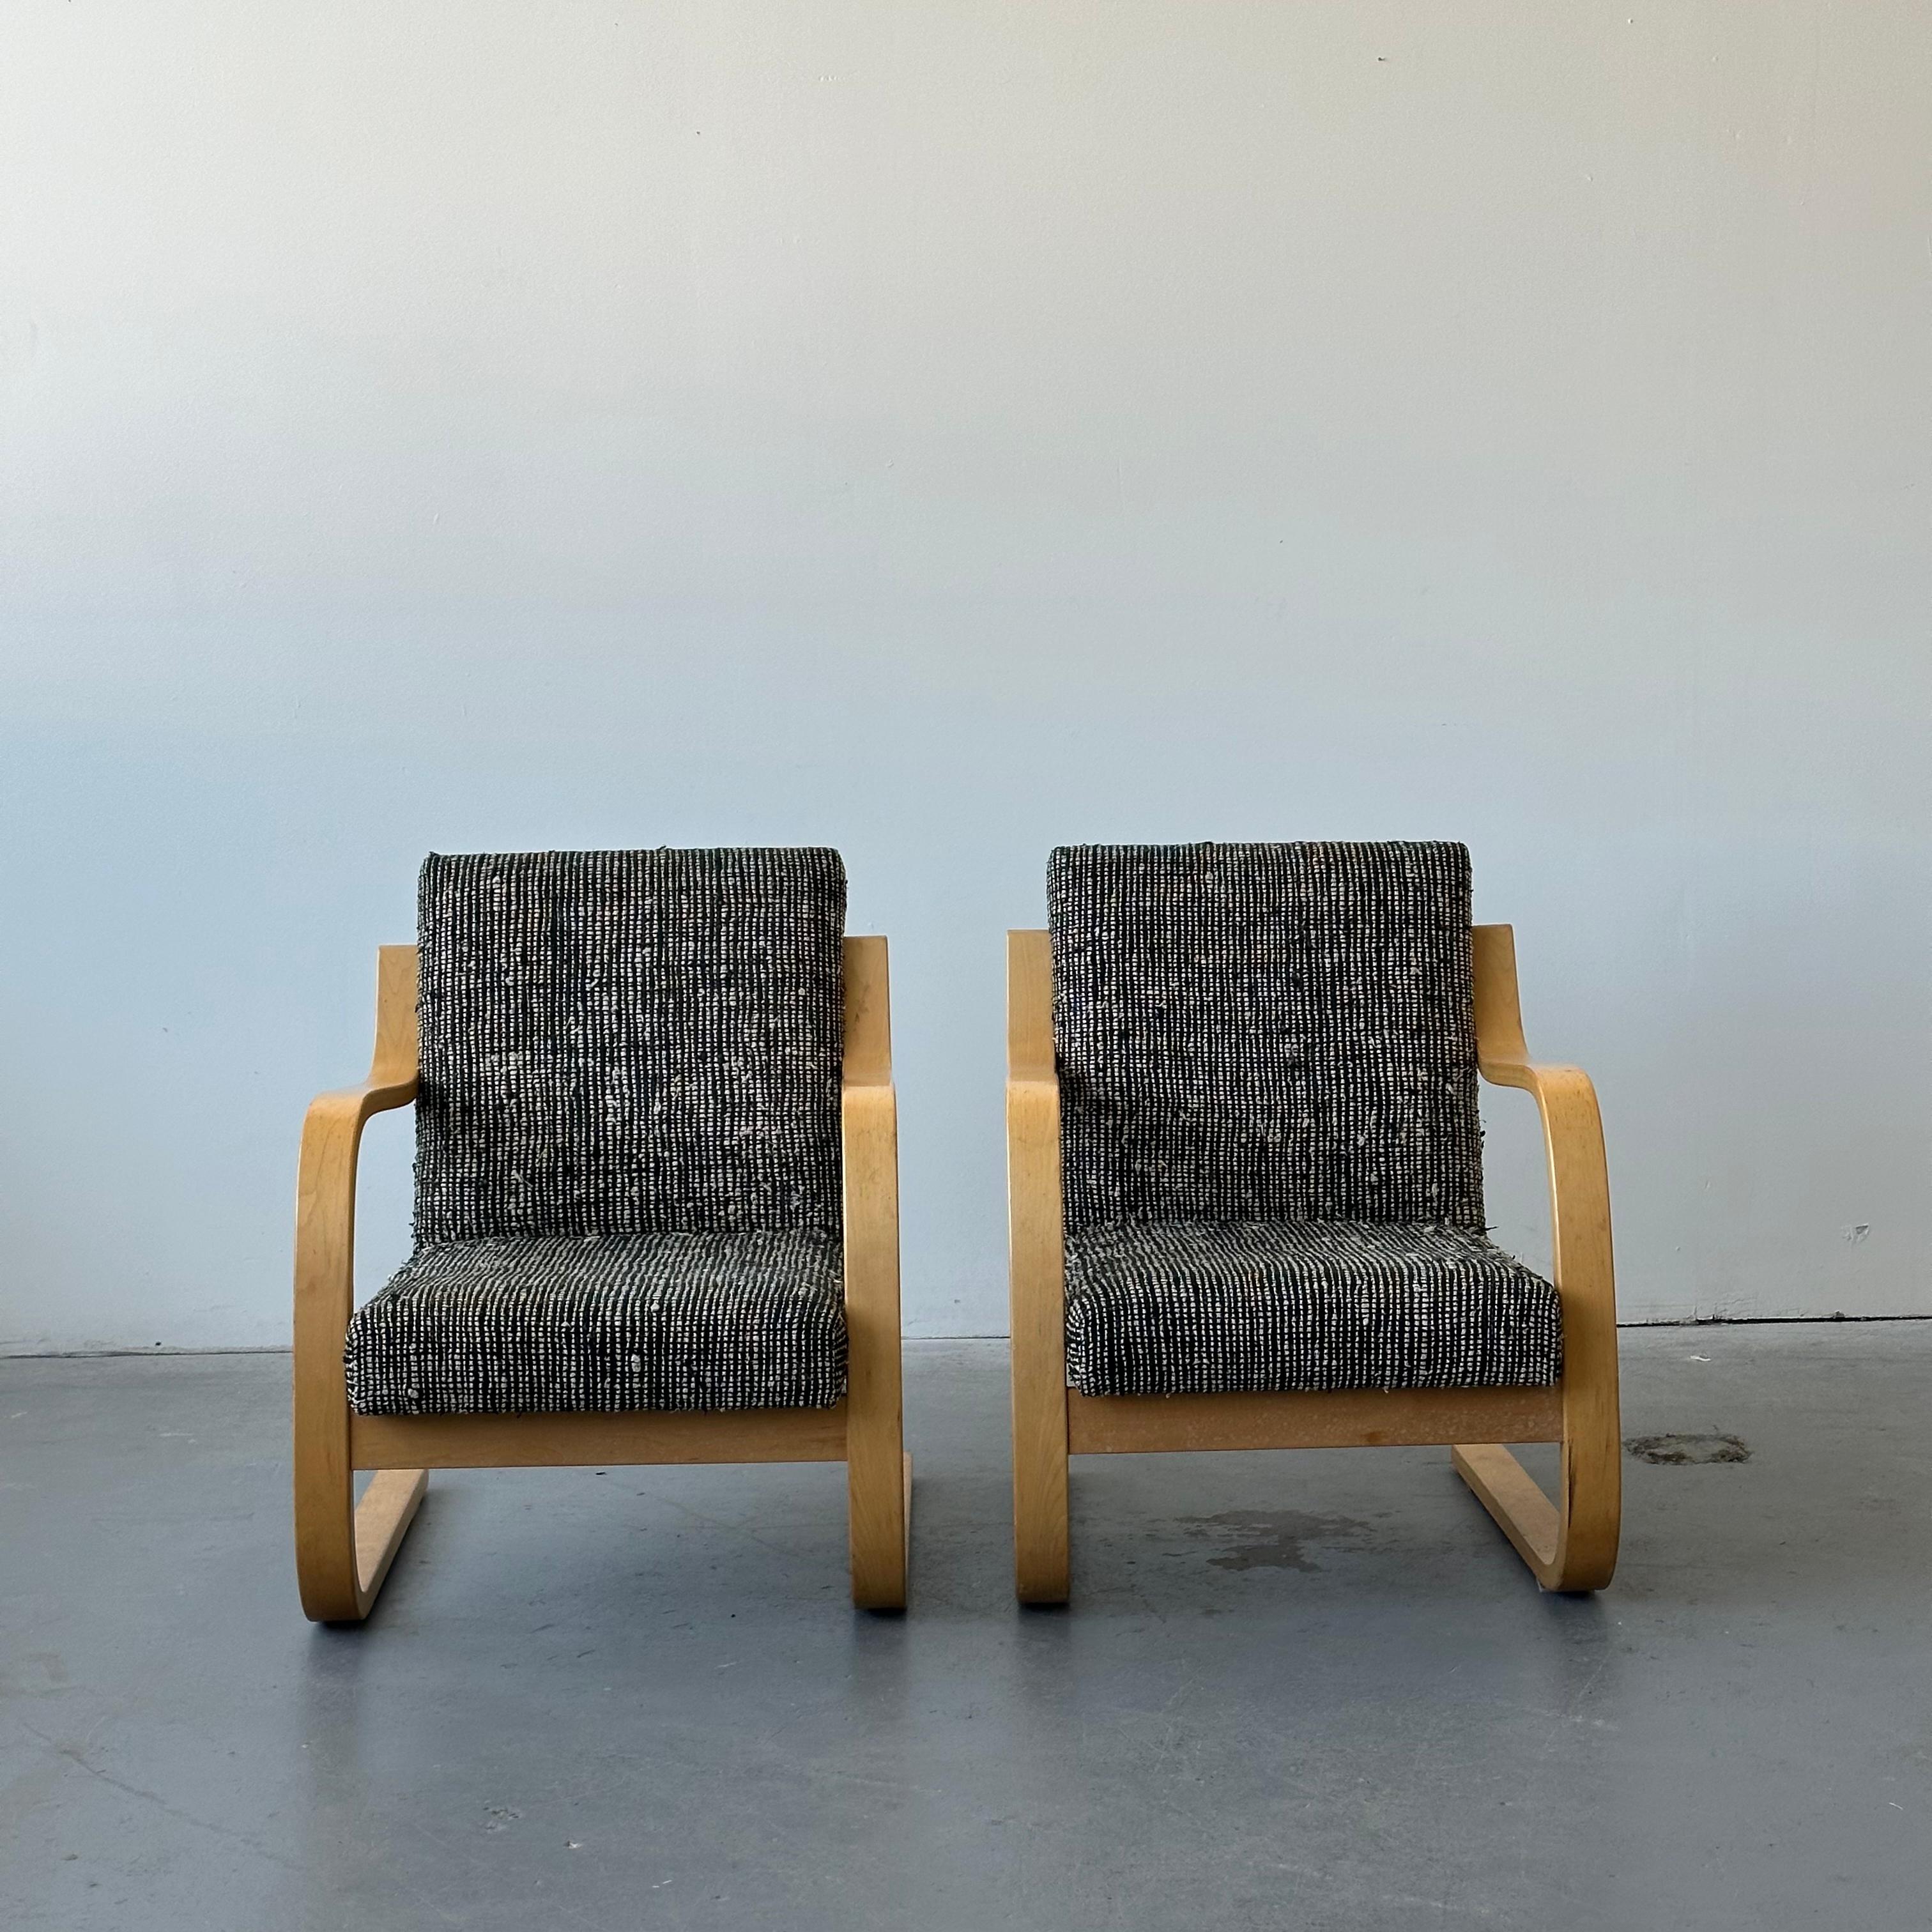 c. 1970s, both chairs are stamped to ensure age and authenticity and retain their original upholstery. There are no holes or rips in the fabric but you can see the wear easily in the photos. The frames themselves also have wear including small